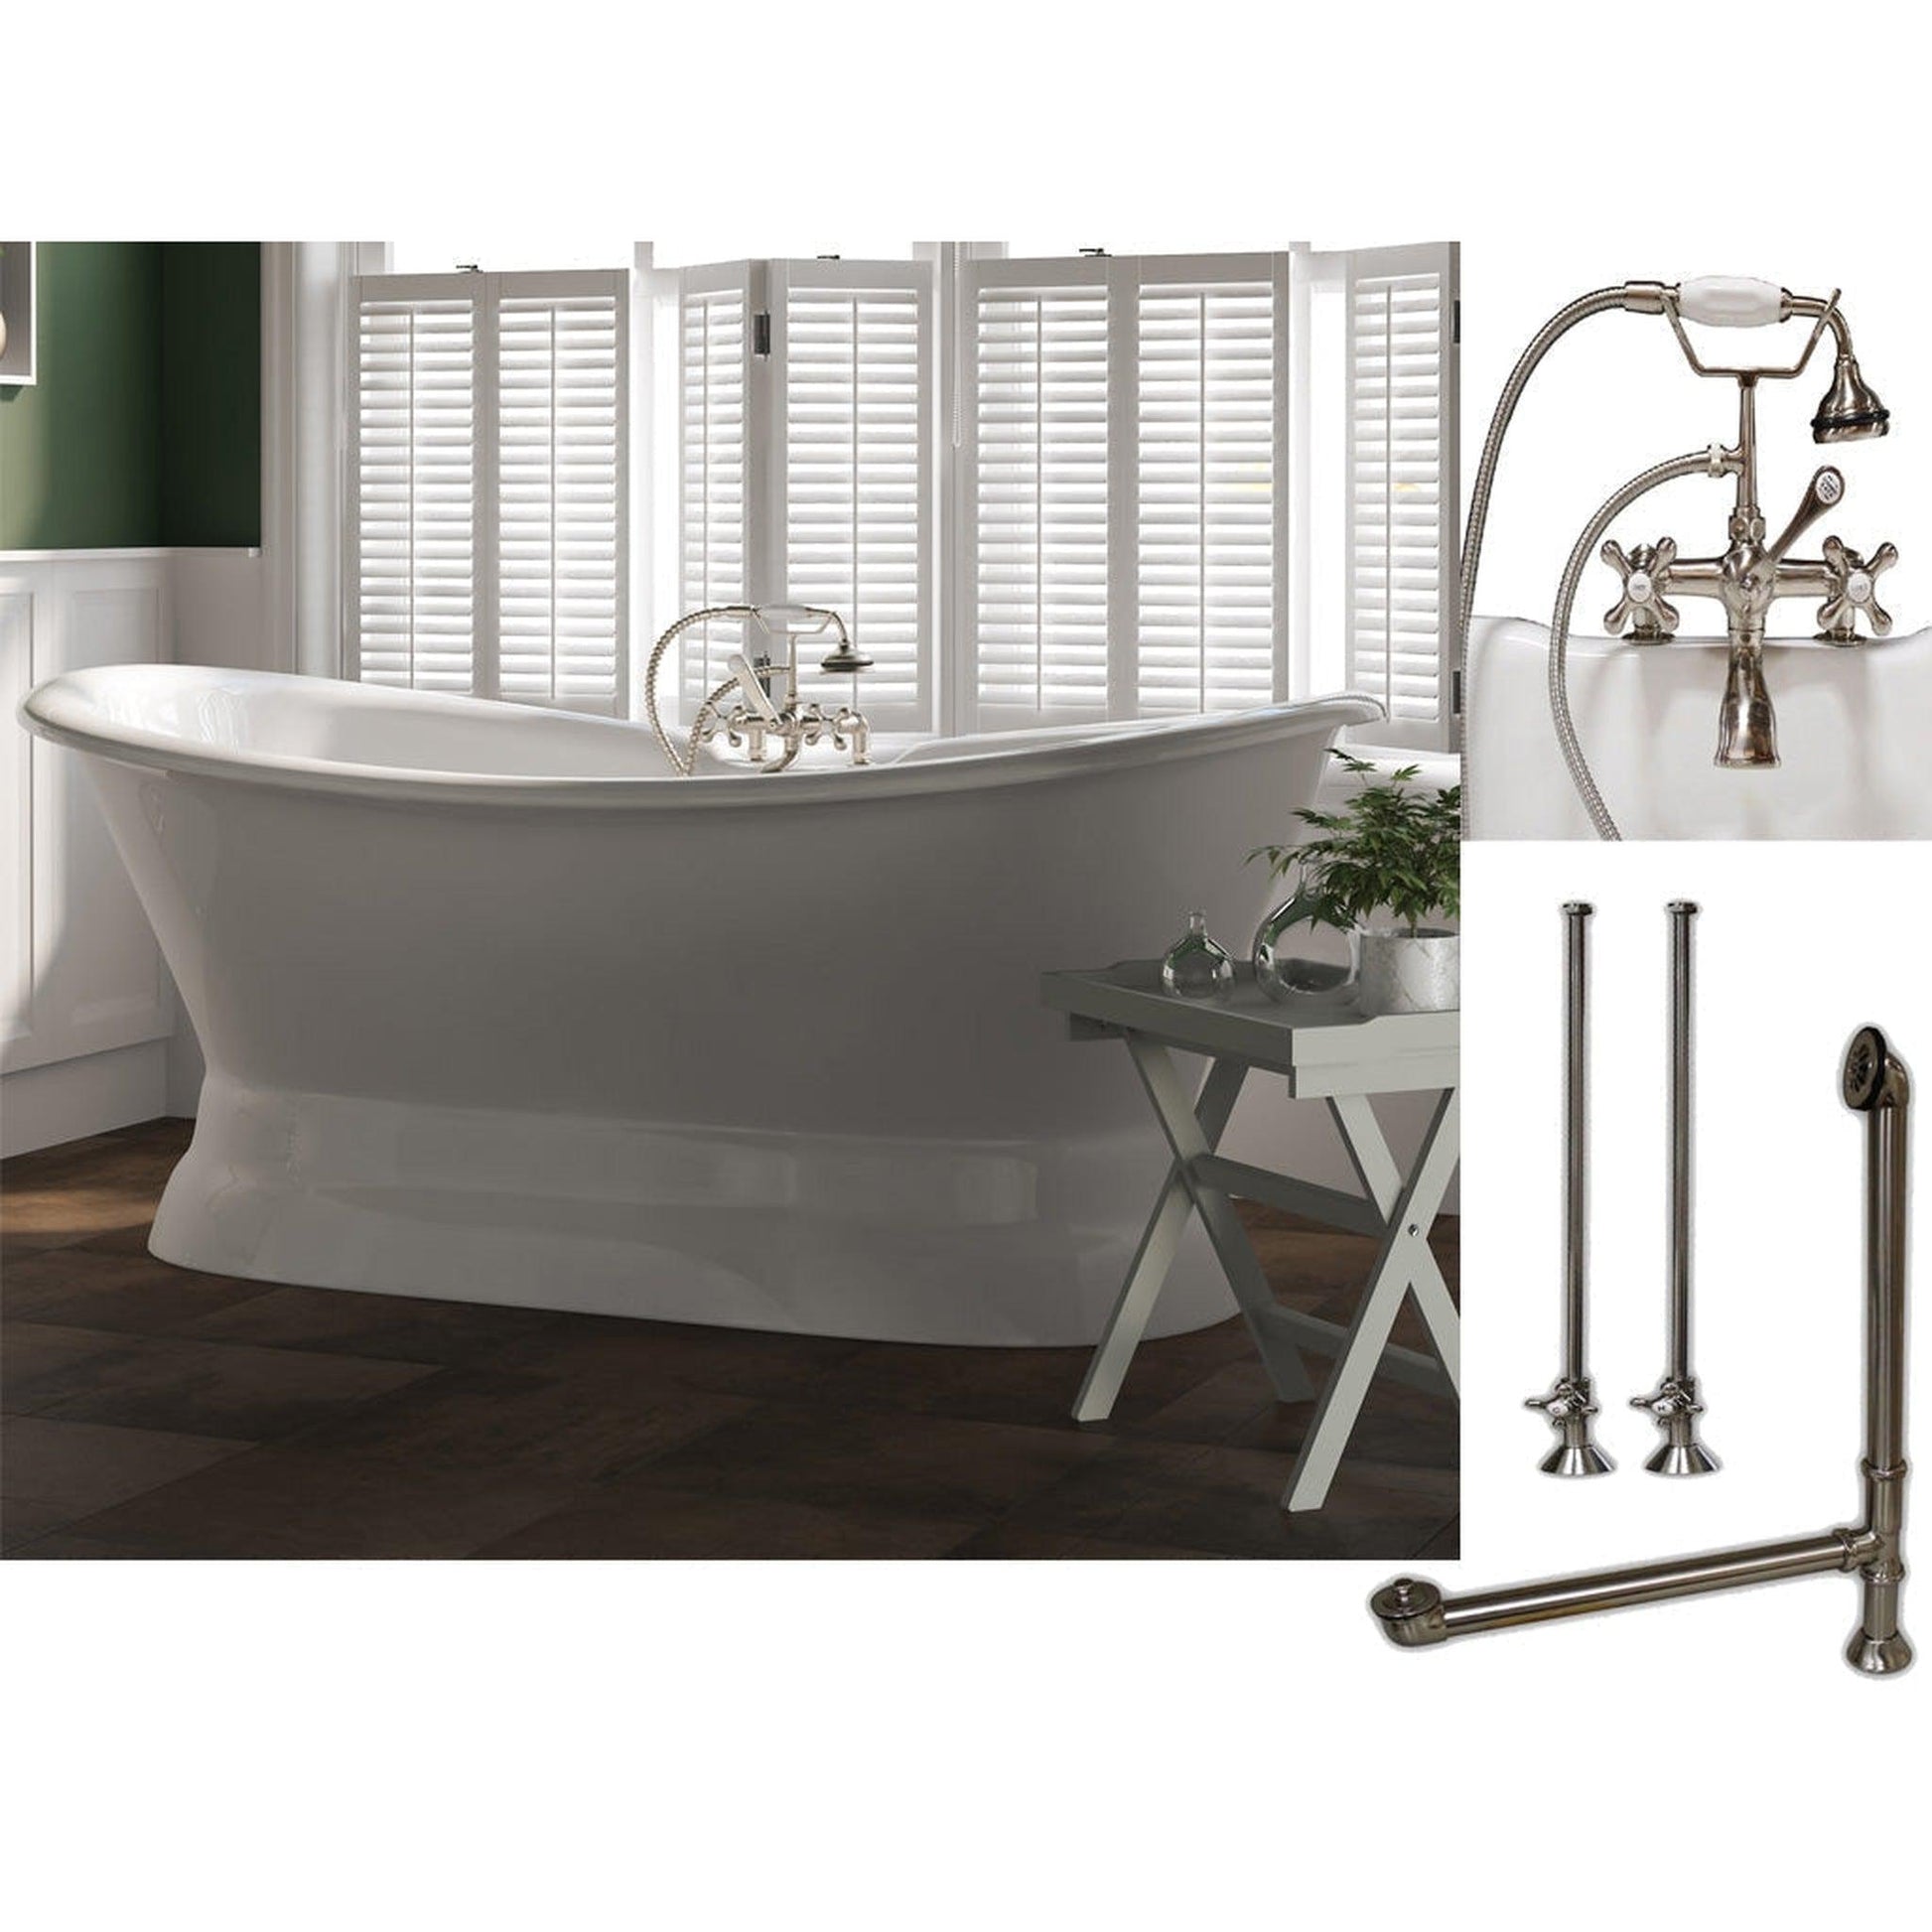 Cambridge Plumbing 71" White Cast Iron Double Slipper Pedestal Bathtub With Deck Holes And Complete Plumbing Package Including 2” Riser Deck Mount Faucet, Supply Lines, Drain And Overflow Assembly In Brushed Nickel